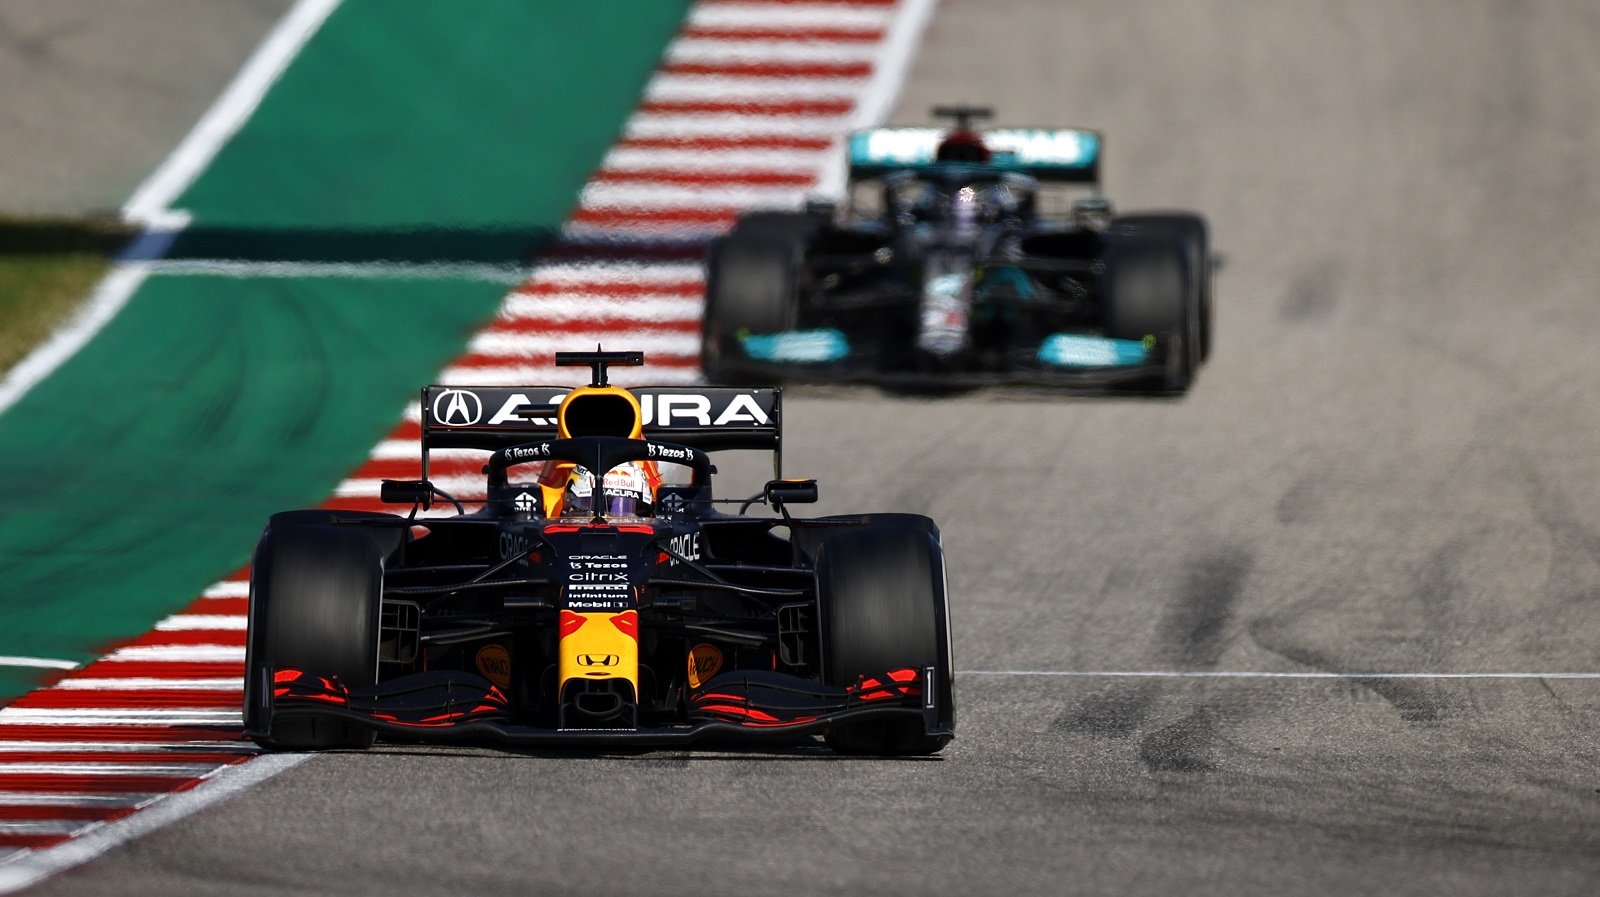 Miami or COTA: Which Formula 1 Race in the U.S. Is Cheaper to Attend?